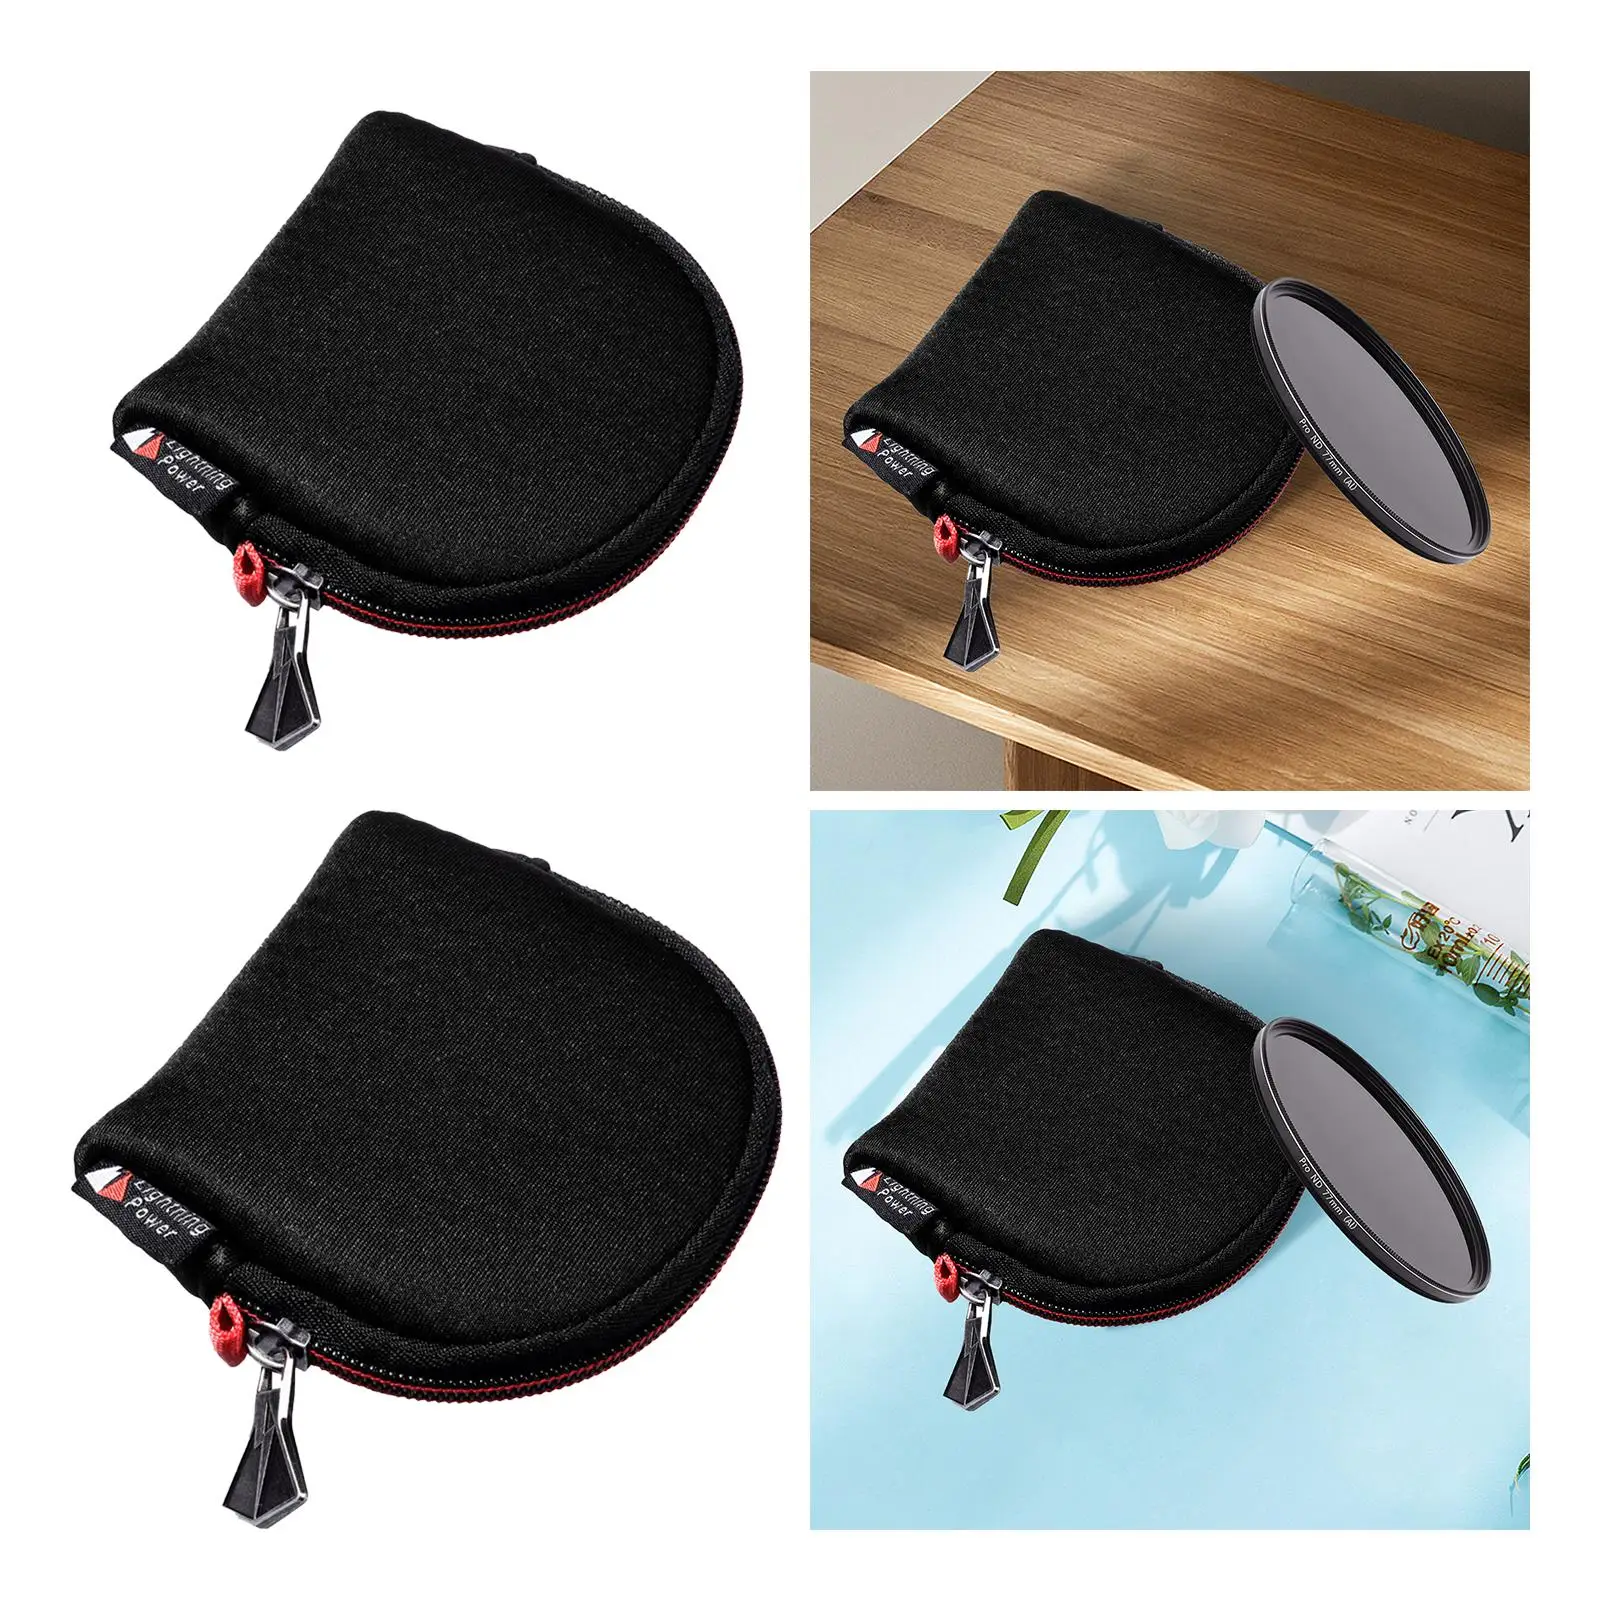 Filter Holder Professional Portable Outside Waterproof Accessories Travel Case Lightweight Camera Filter Pouch Lens Filter Case